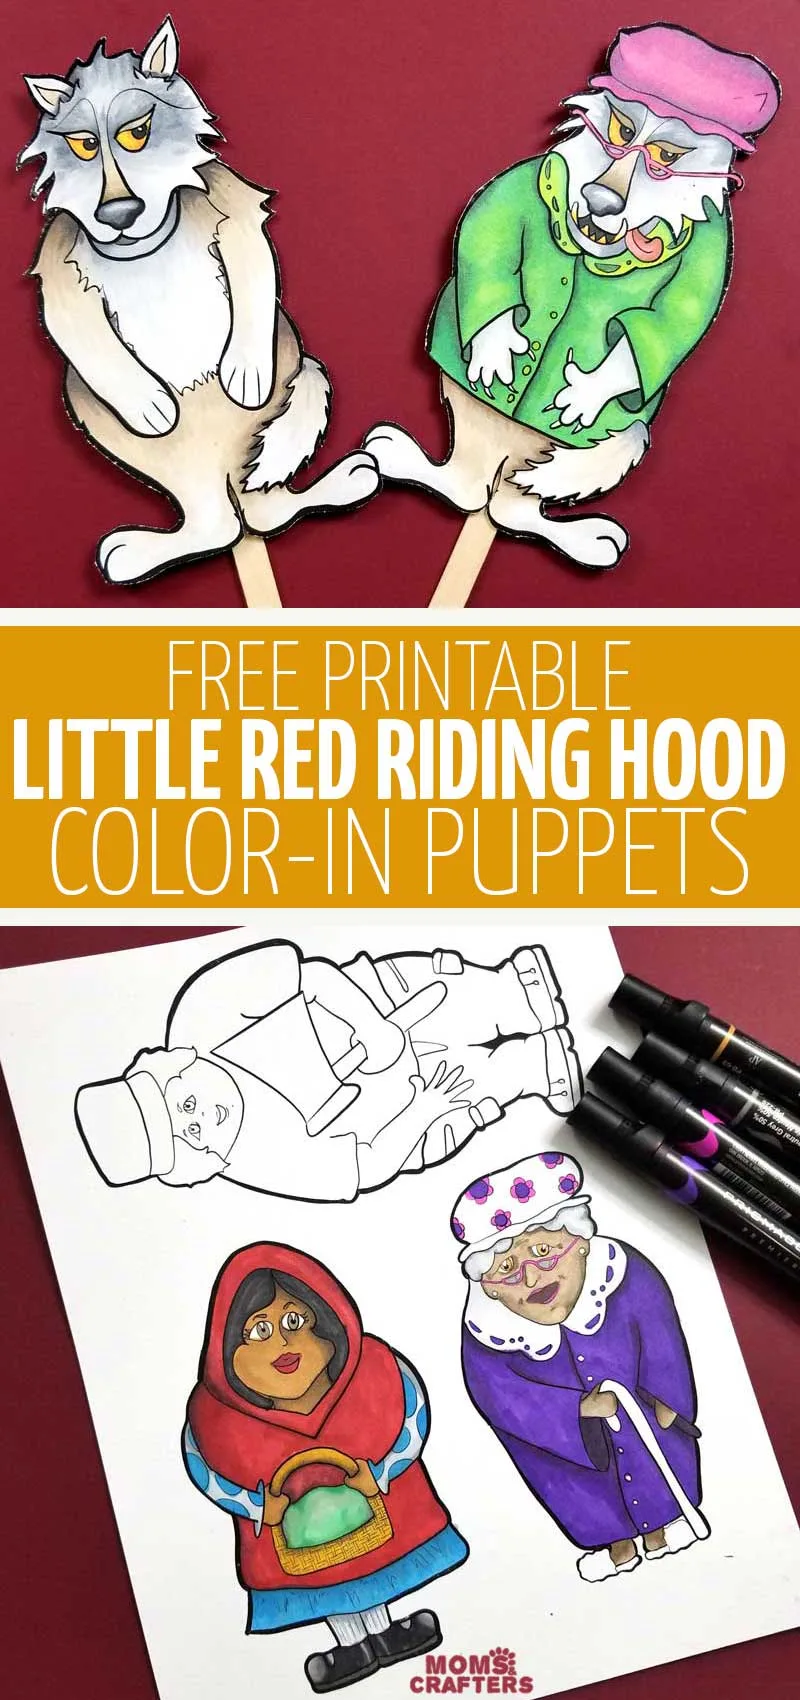 Click to download free printable little red riding hood puppets coloring pages - a fun literacy and dramatic playl activity for kids! This fun book inspired craft is perfect for teaching kids about stranger danger. 